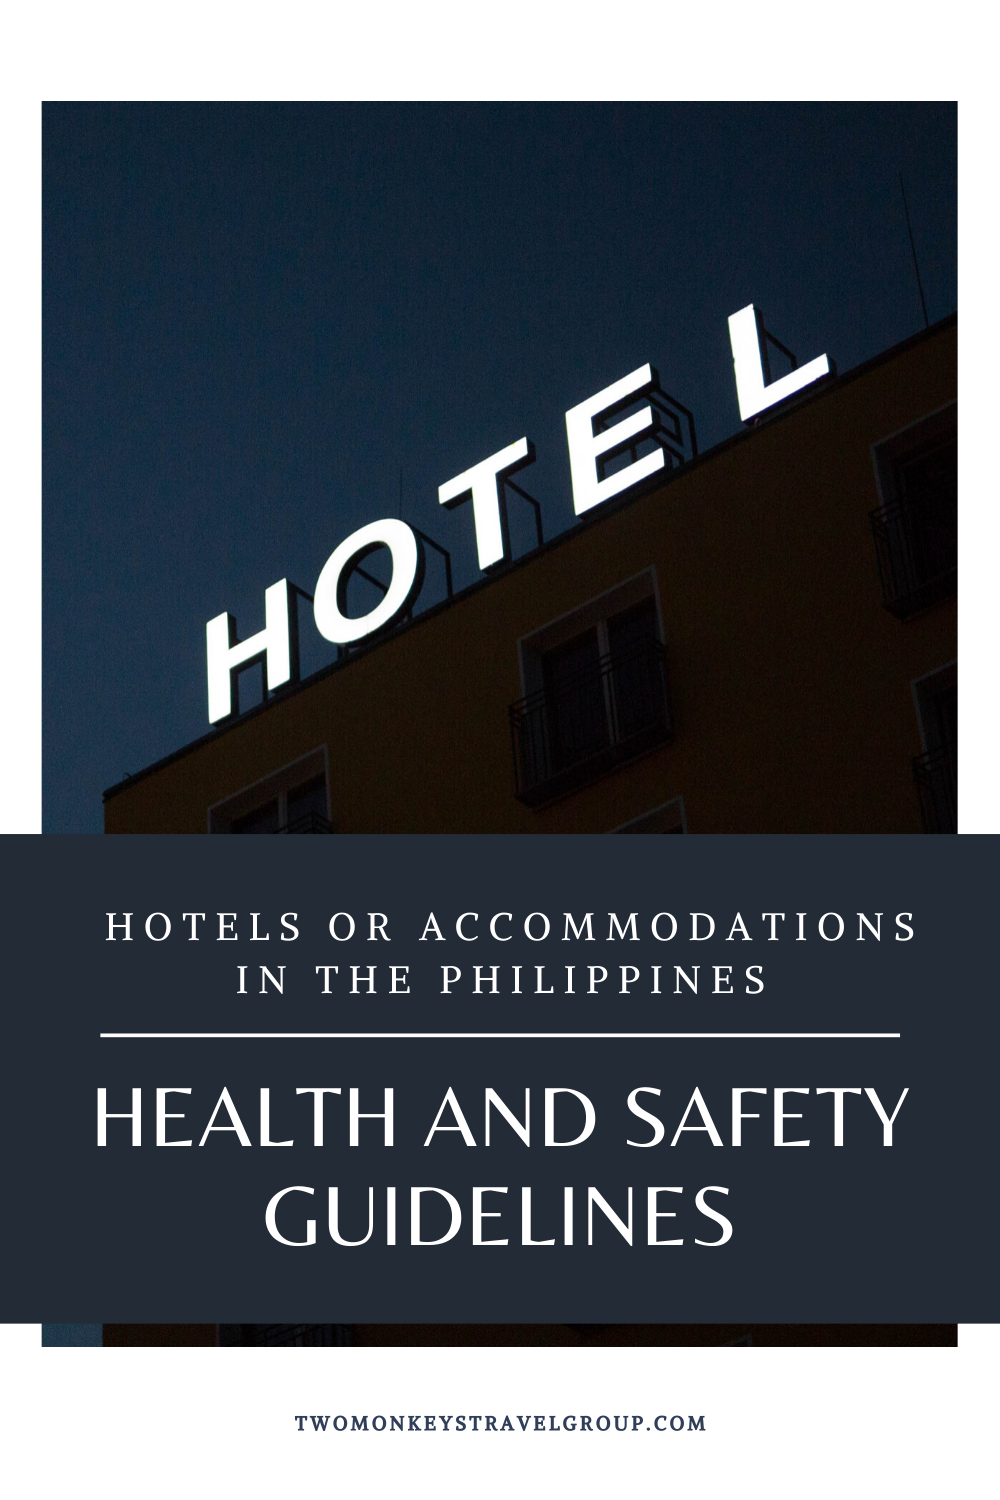 Health and Safety Guidelines of Hotels or Accommodations in the Philippines